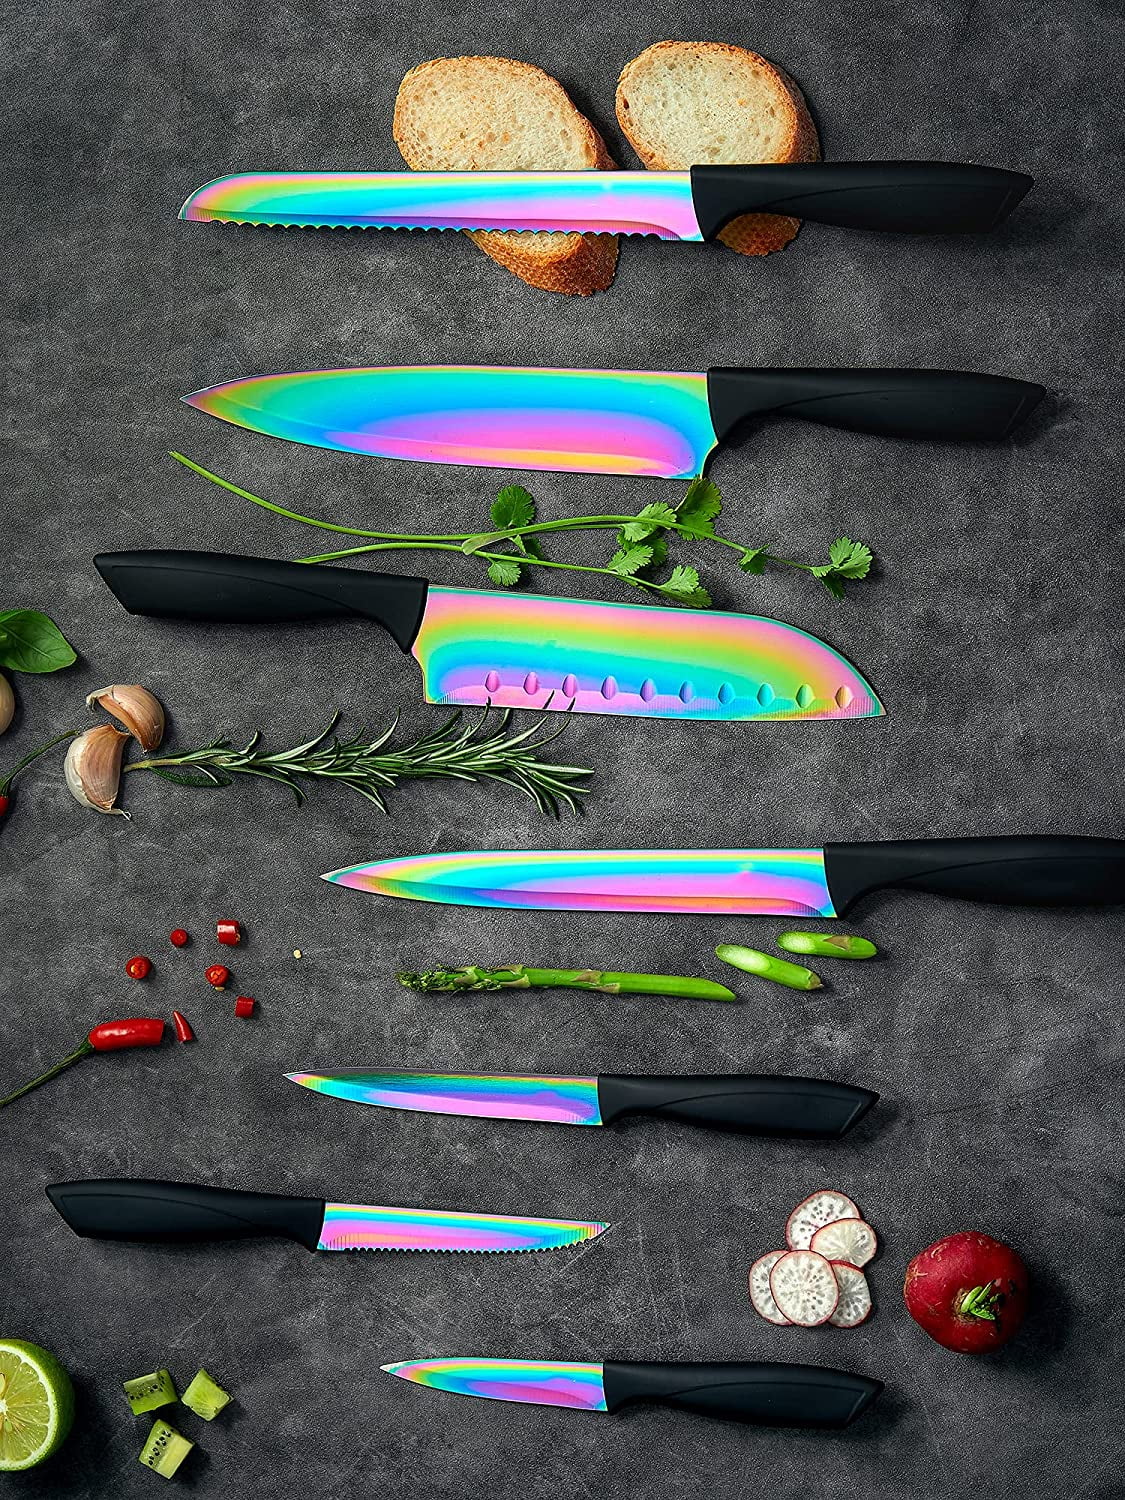 Aiheal Knife Set, 16 Pieces High Carbon Stainless Steel Rainbow Color